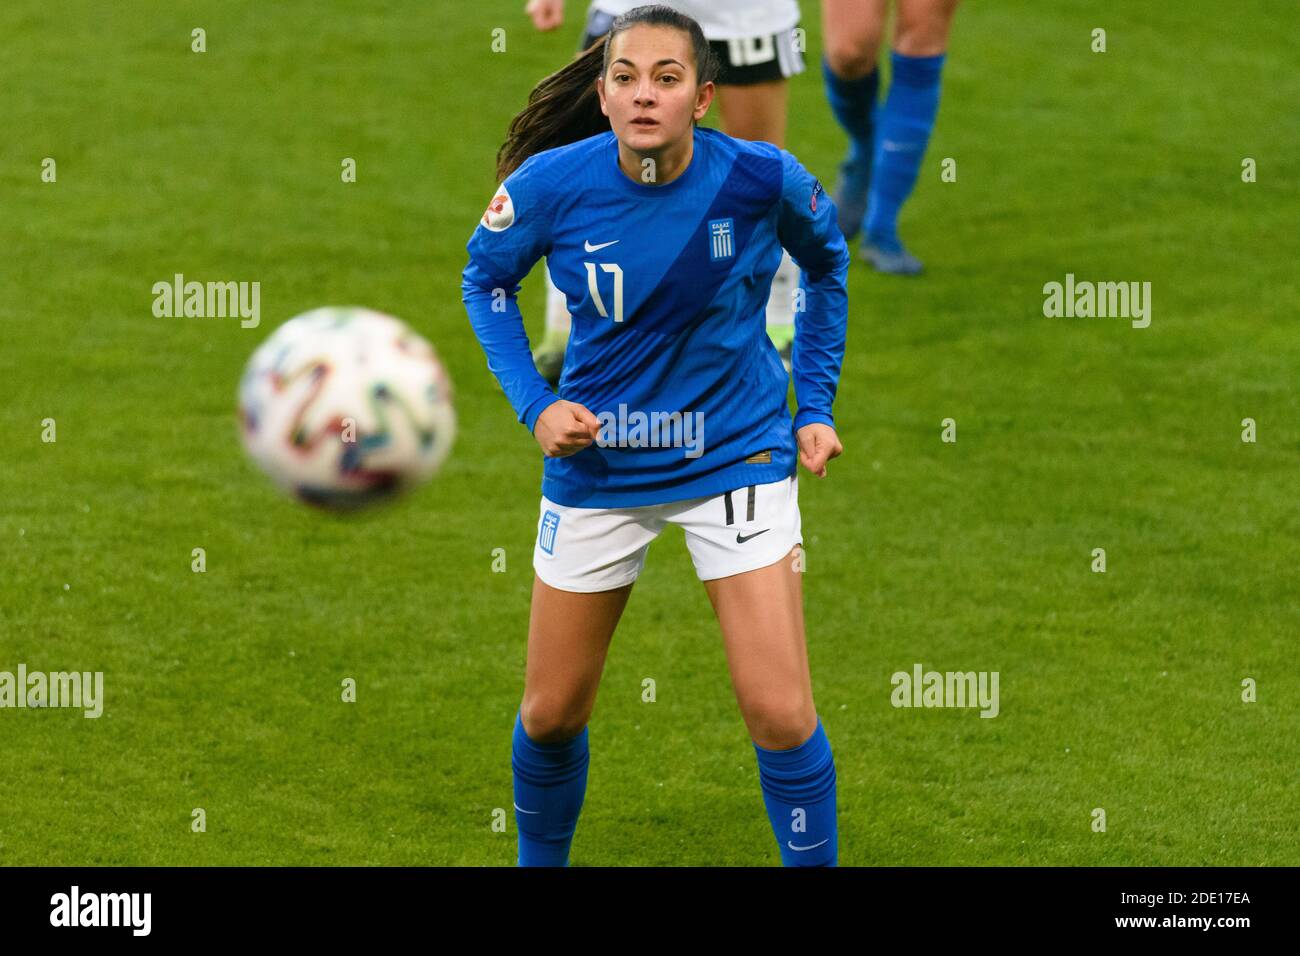 Ingolstadt, Germany. 27th Nov, 2020. Athanasia Moraitou (#17 Greece) during the UEFA Women's European Championship Qualification match between Germany and Greece. Sven Beyrich/SPP Credit: SPP Sport Press Photo. /Alamy Live News Stock Photo